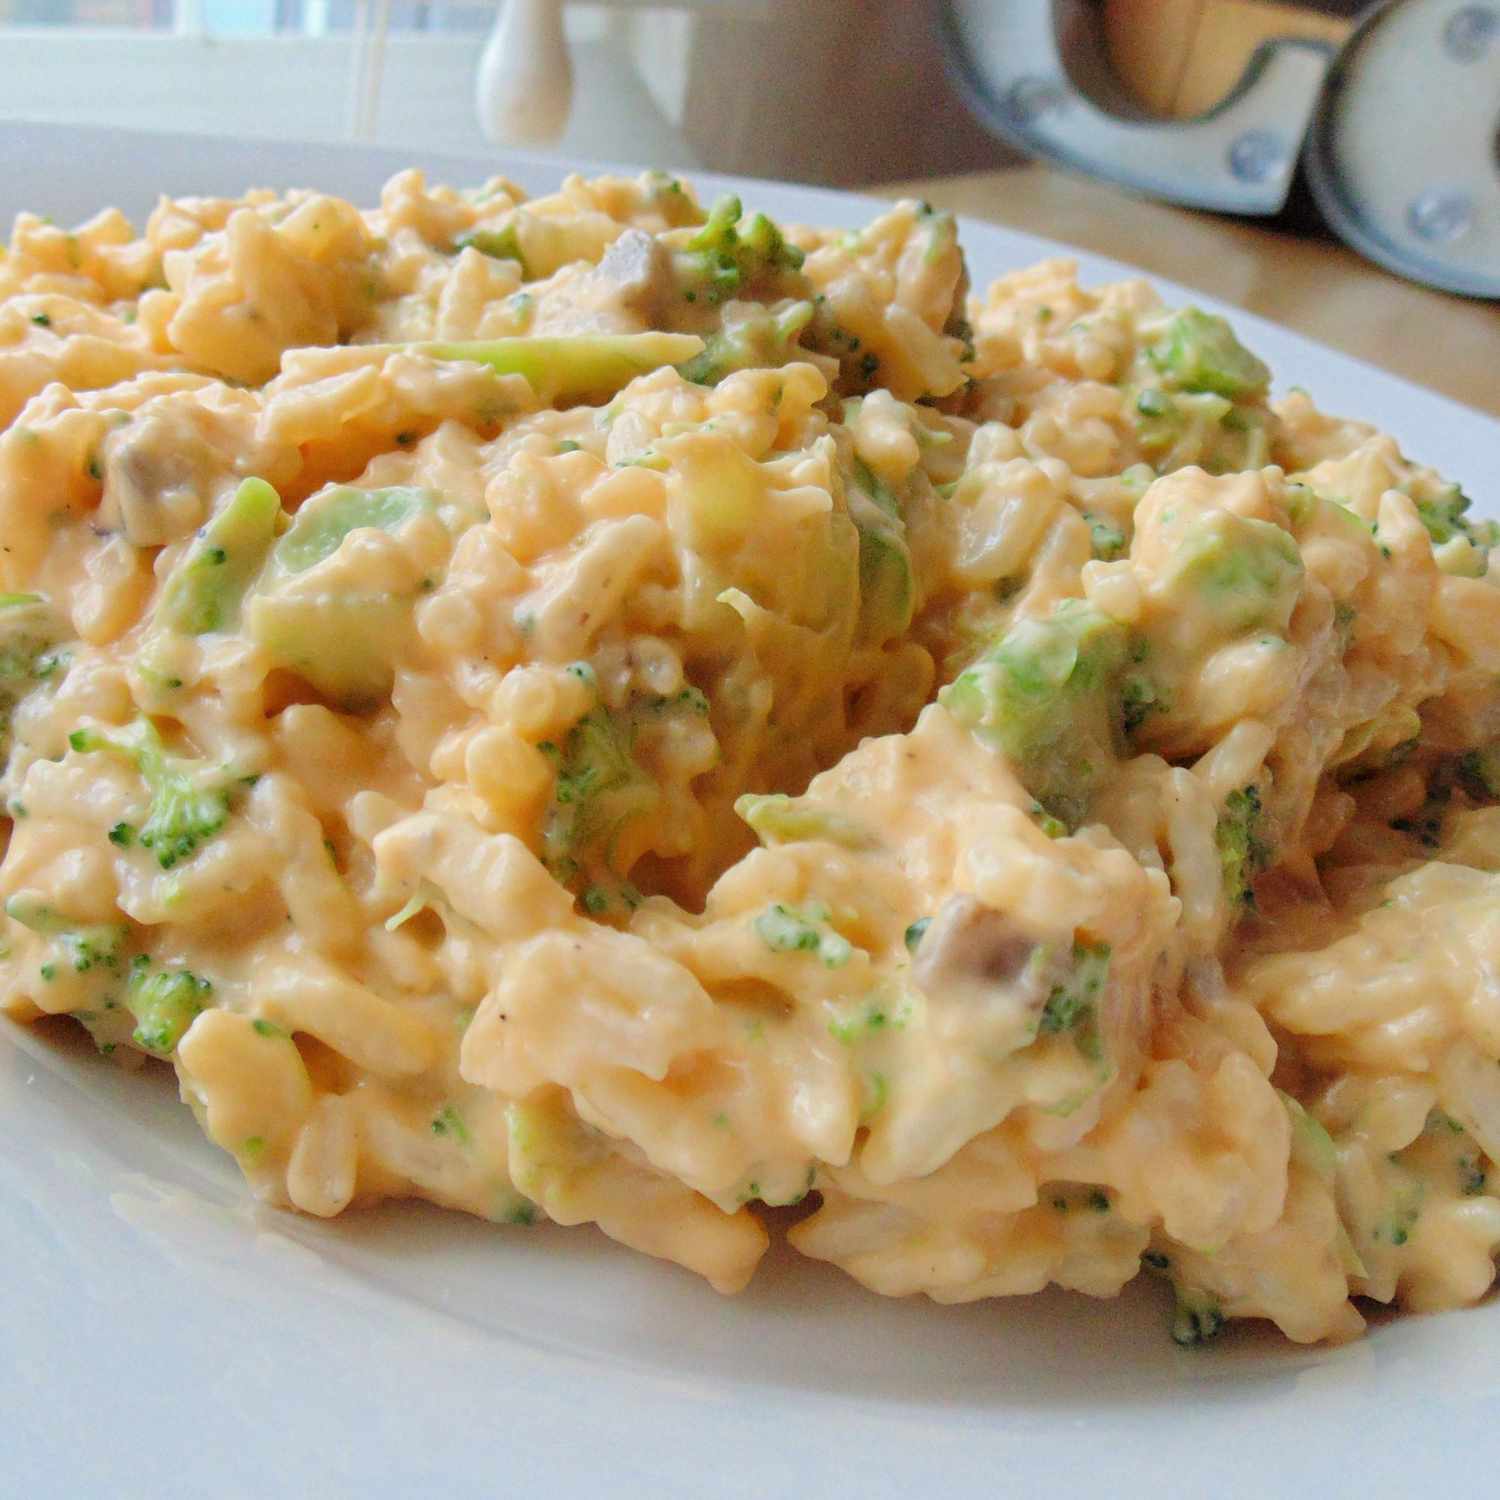 a serving of creamy-looking cheese and broccoli rice casserole on a white plate